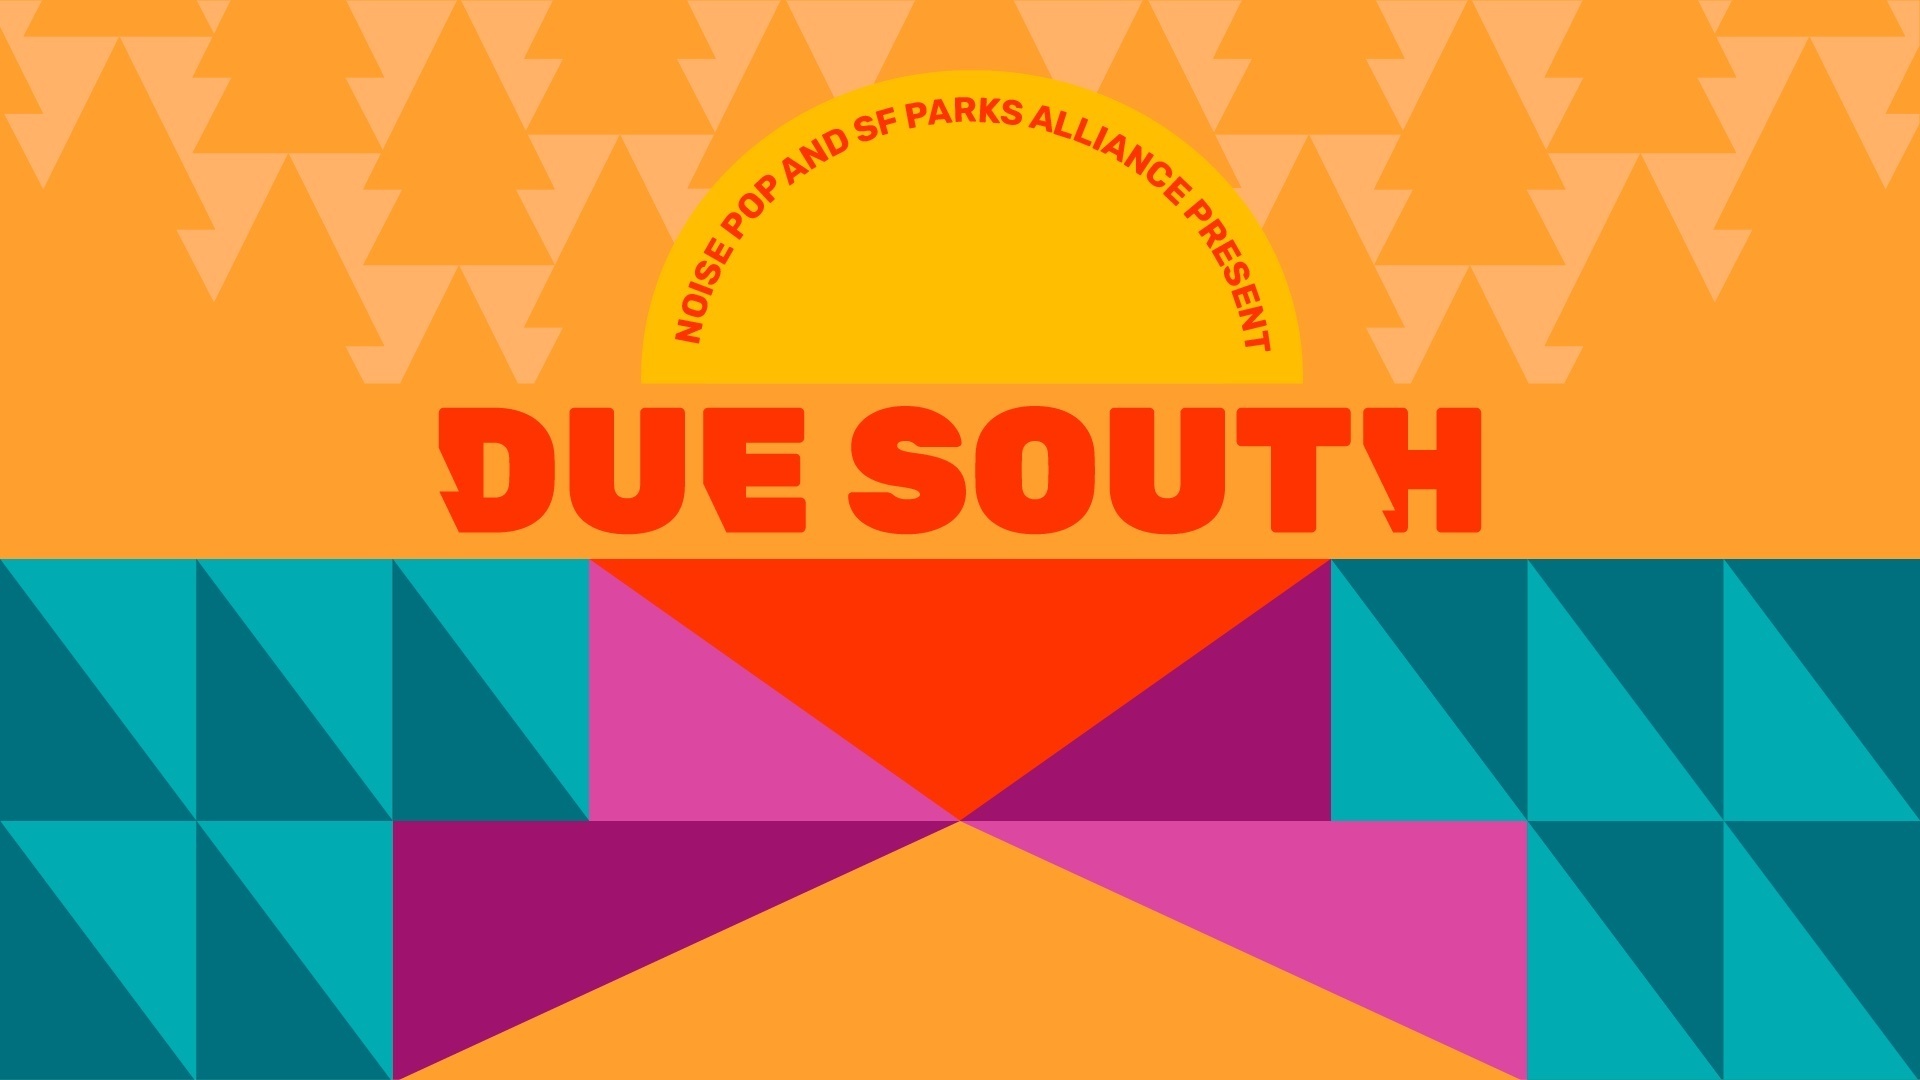 Due South Concert Series Kick-Off: Deafheaven and Marbled Eye!, San Francisco, California, United States